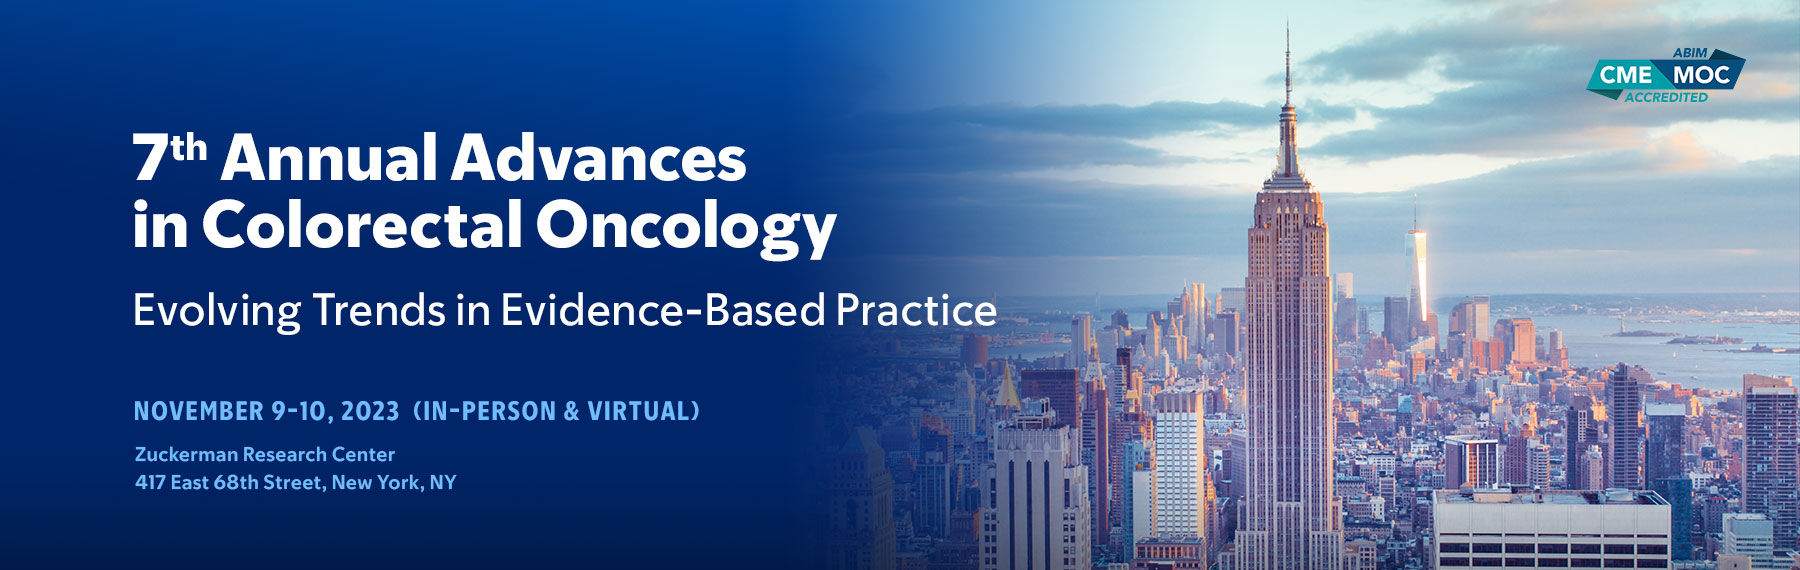 7th Annual Advances in Colorectal Oncology: Evolving Trends in Evidence-Based Practice Banner